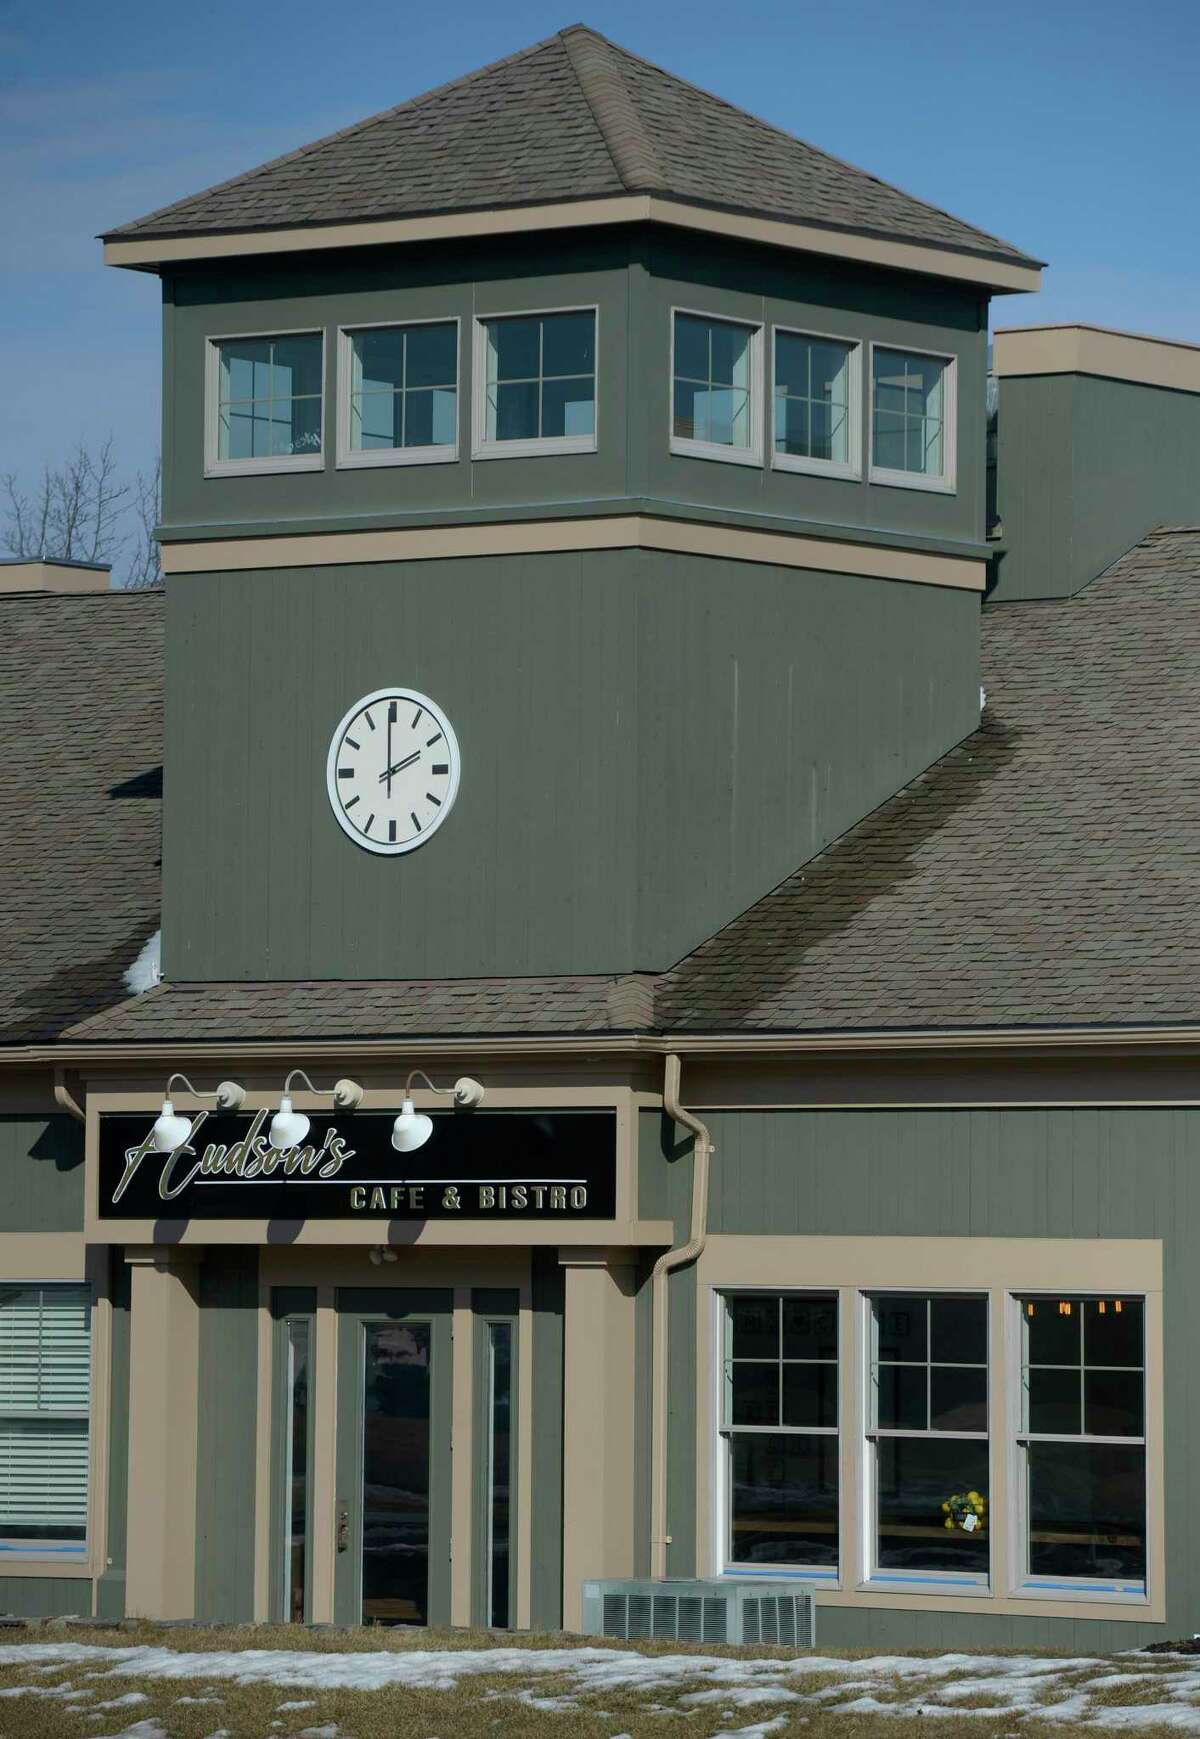 Hudson’s Cafe & Bistro in Southbury, Conn. Wednesday, March 2, 2022.